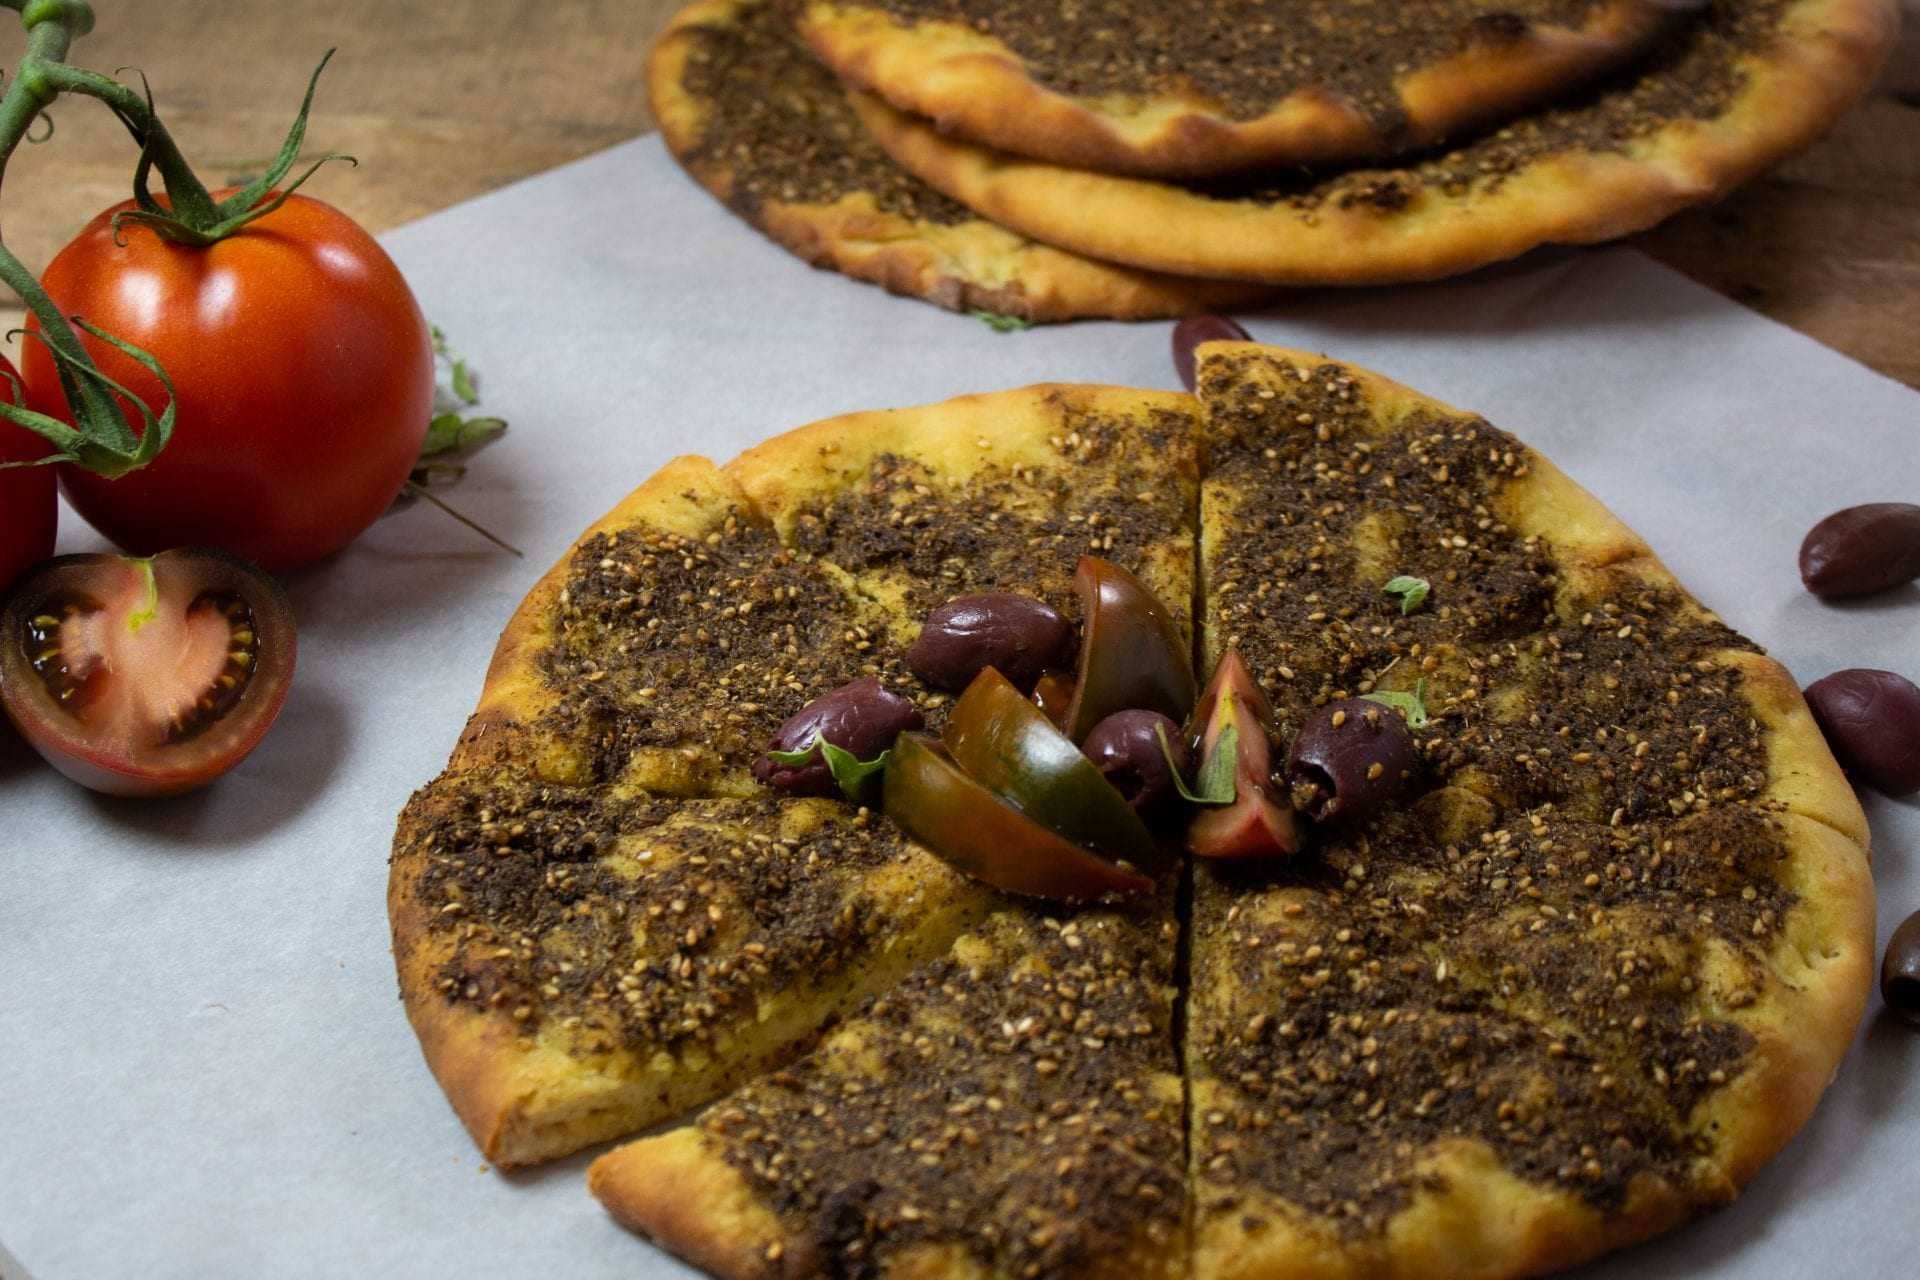 Za'atar and Olive Oil Flatbread with Tomatoes and Olives